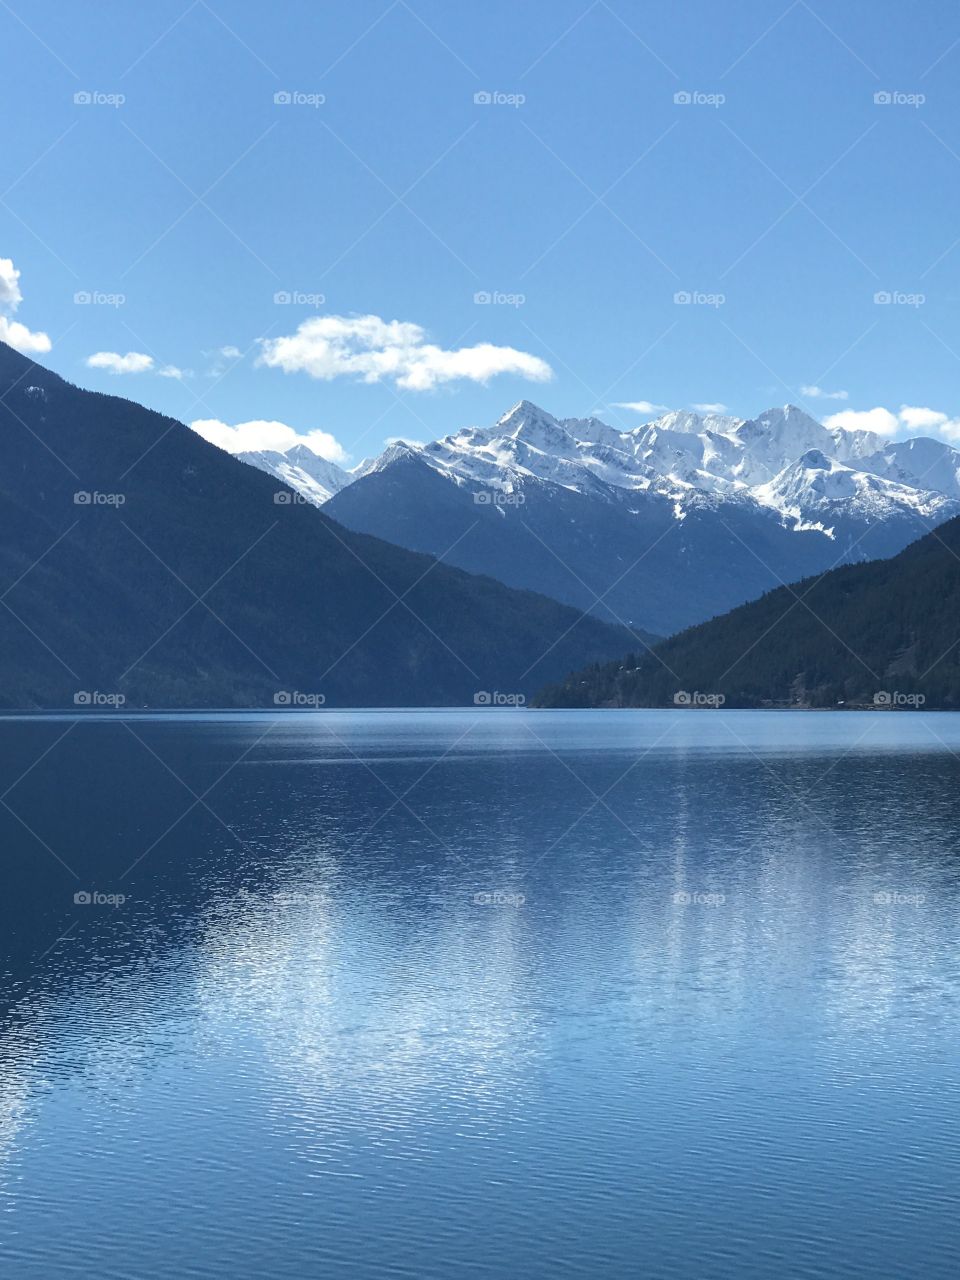 Reflection of mountain on lake during winter